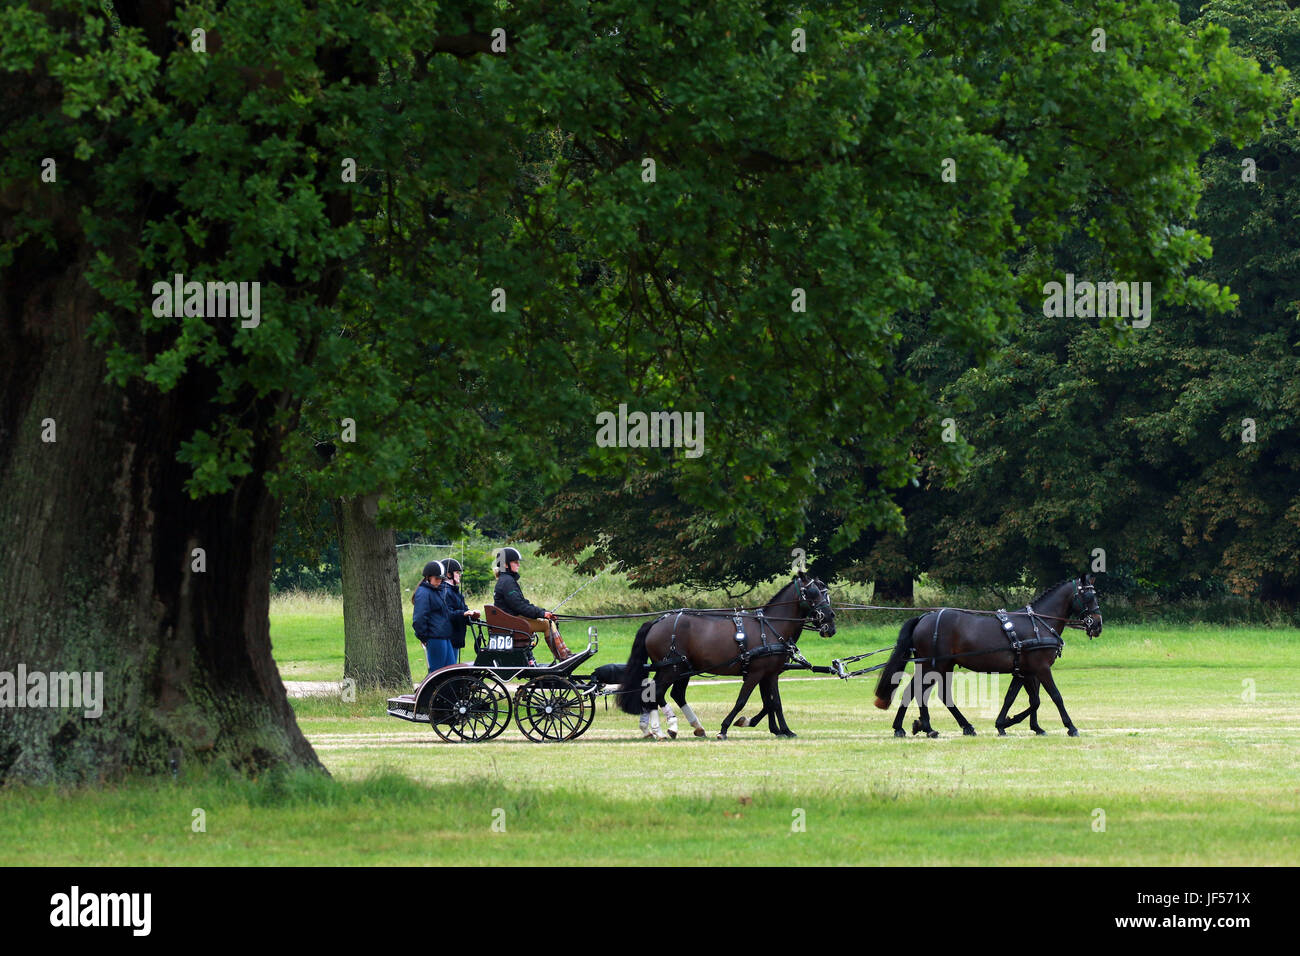 Sandringham, Norfolk, UK. 29th June, 2017. Competitors attending the Sandringham Carriage Driving Trials take the opportunity to get their horses out and drive the course now that the heavy rain has stopped. Sandringham Carriage Driving Trials, Sandringham, Norfolk,  June 29, 2017 Credit: Paul Marriott/Alamy Live News Stock Photo